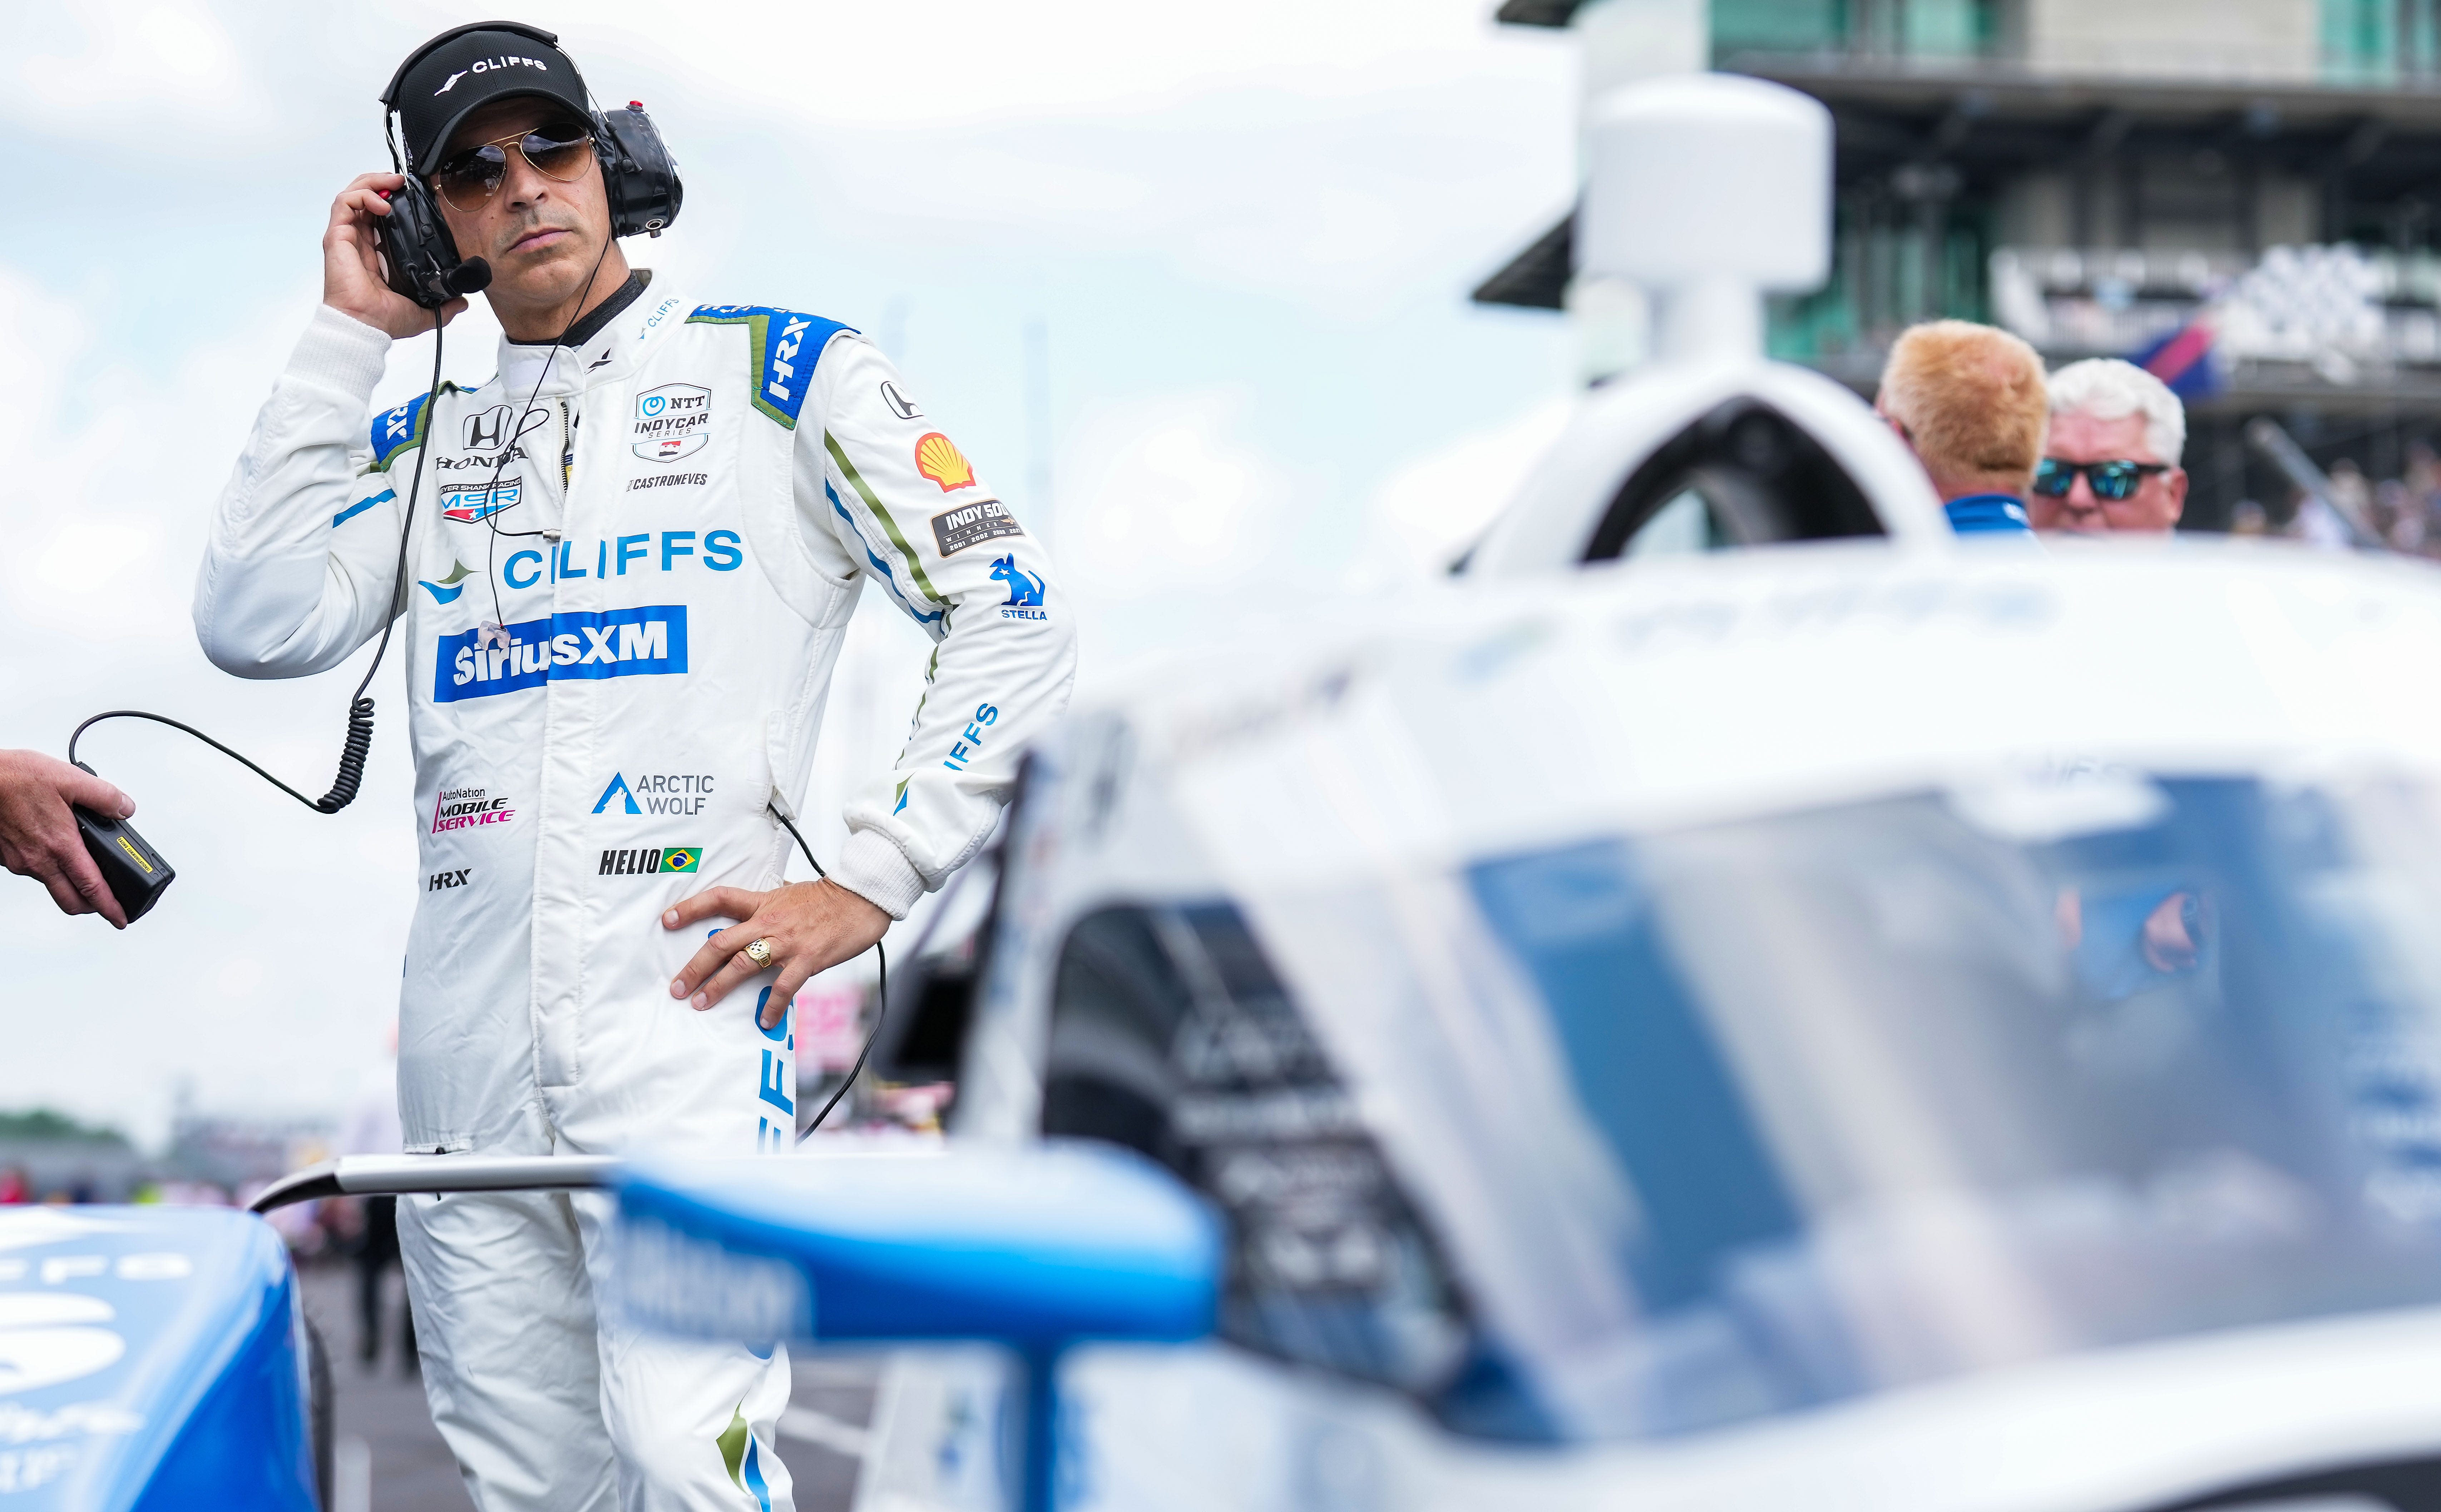 One backup plan isn't enough as a dark cloud hangs over Kyle Larson's Indy-NASCAR double